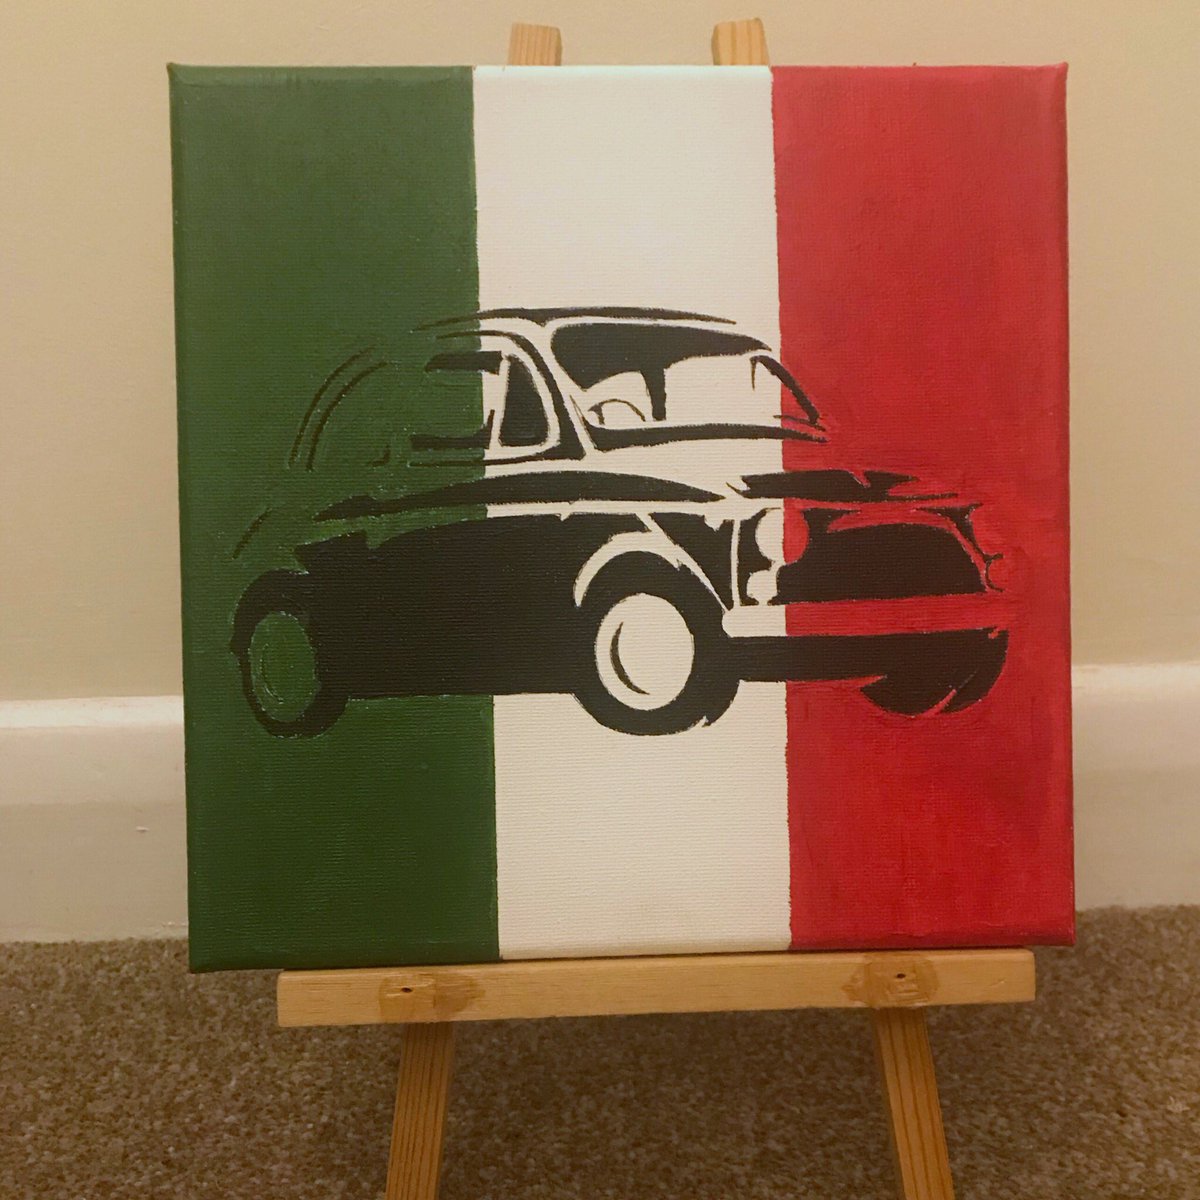 Before & after... #Fiat500 #art